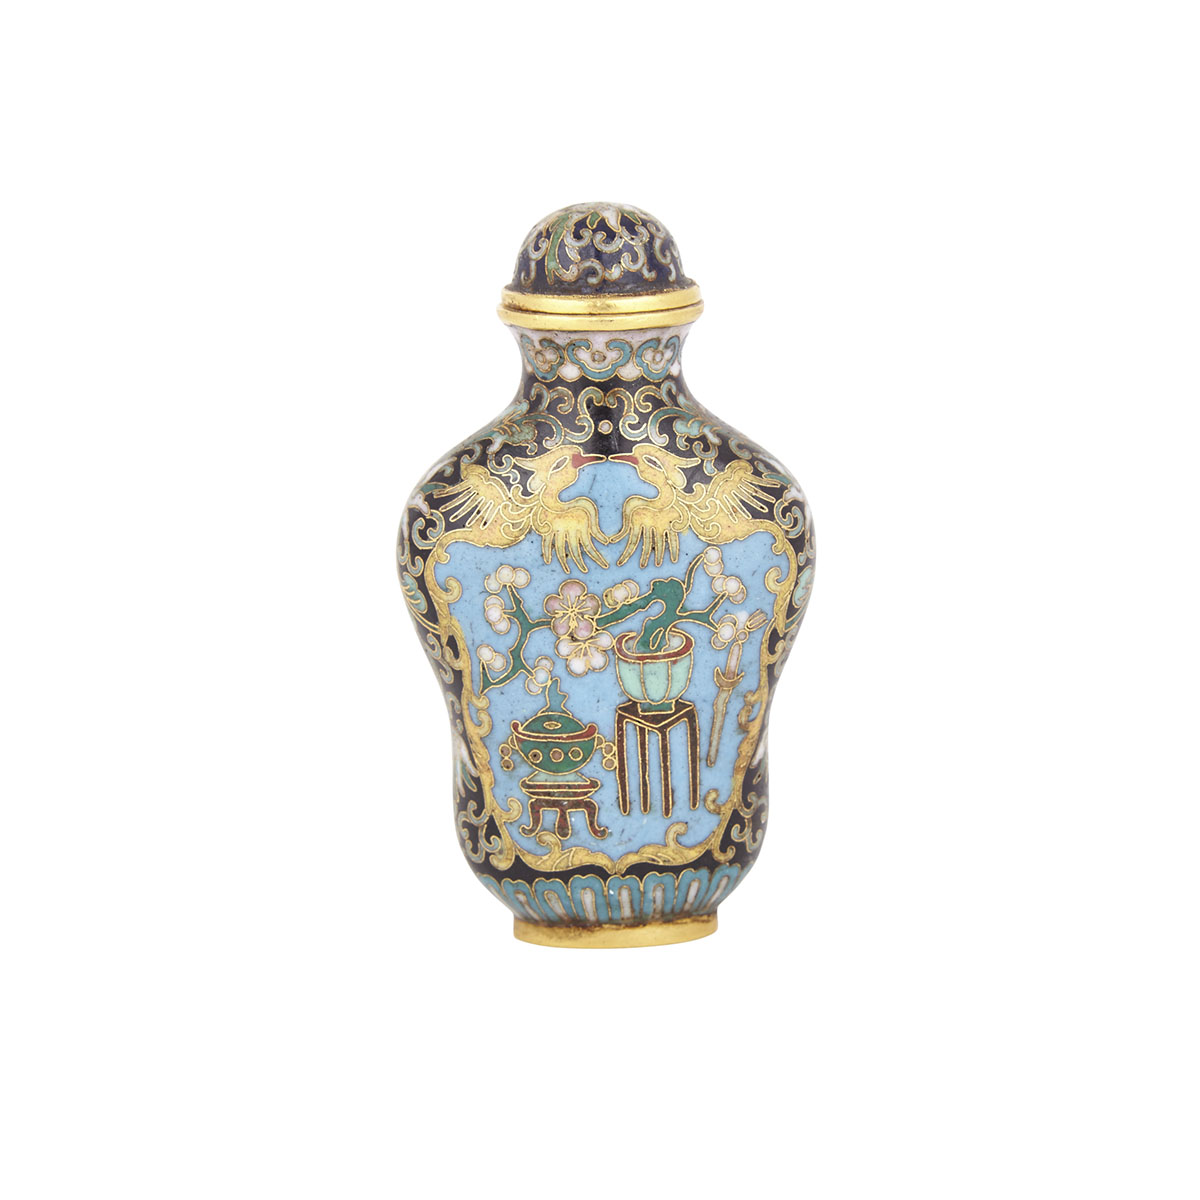 A Black-Ground Cloisonné Snuff Bottle, Four-Character Incised Qianlong Mark, 19th Century or Earlier 